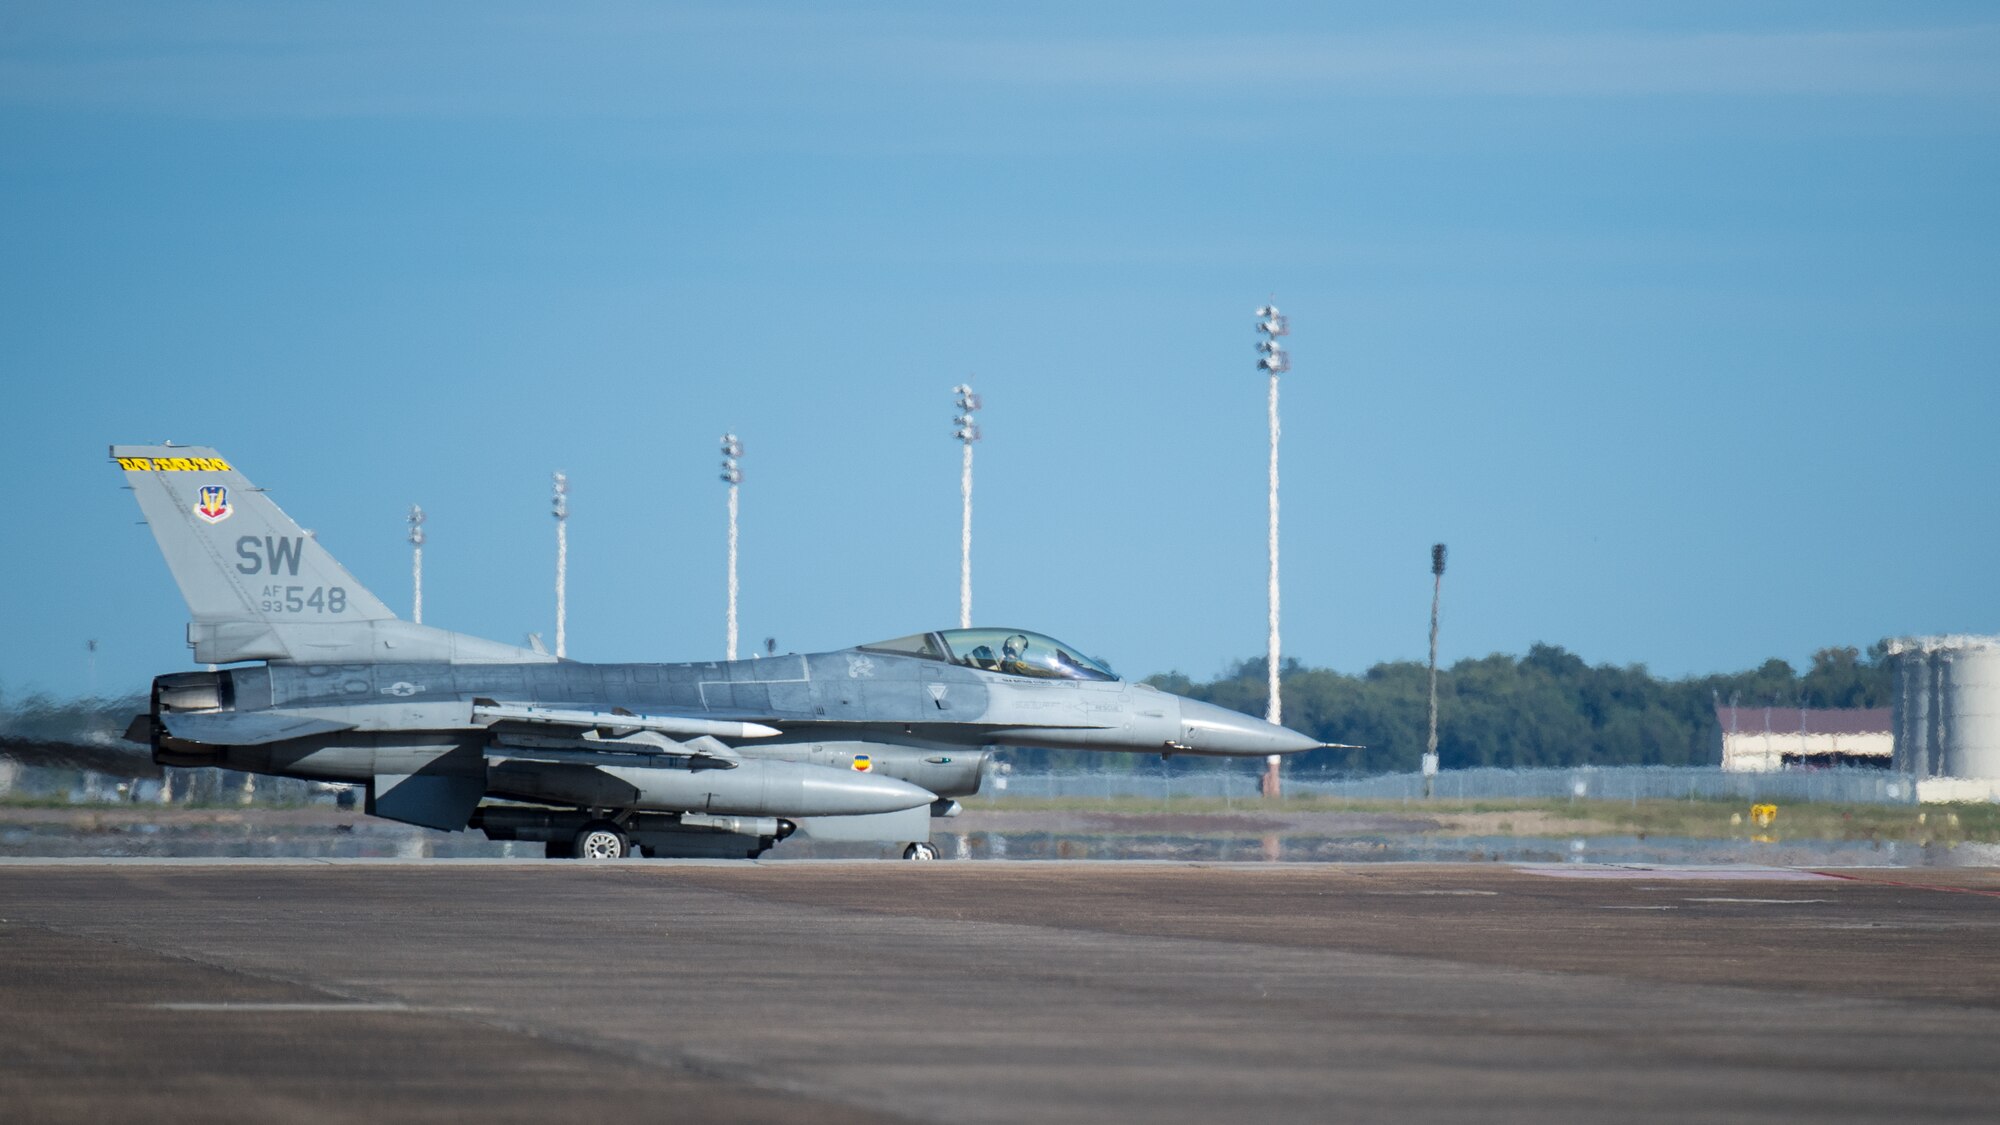 An F-16 Fighting Falcon from Shaw Air Force Base, S.C., prepares to takeoff at Barksdale Air Force Base, La., Oct. 12, 2018. The aircraft evacuated to Barksdale to avoid possible damage from Hurricane Michael. (U.S. Air Force photo by Airman 1st Class Lillian Miller)